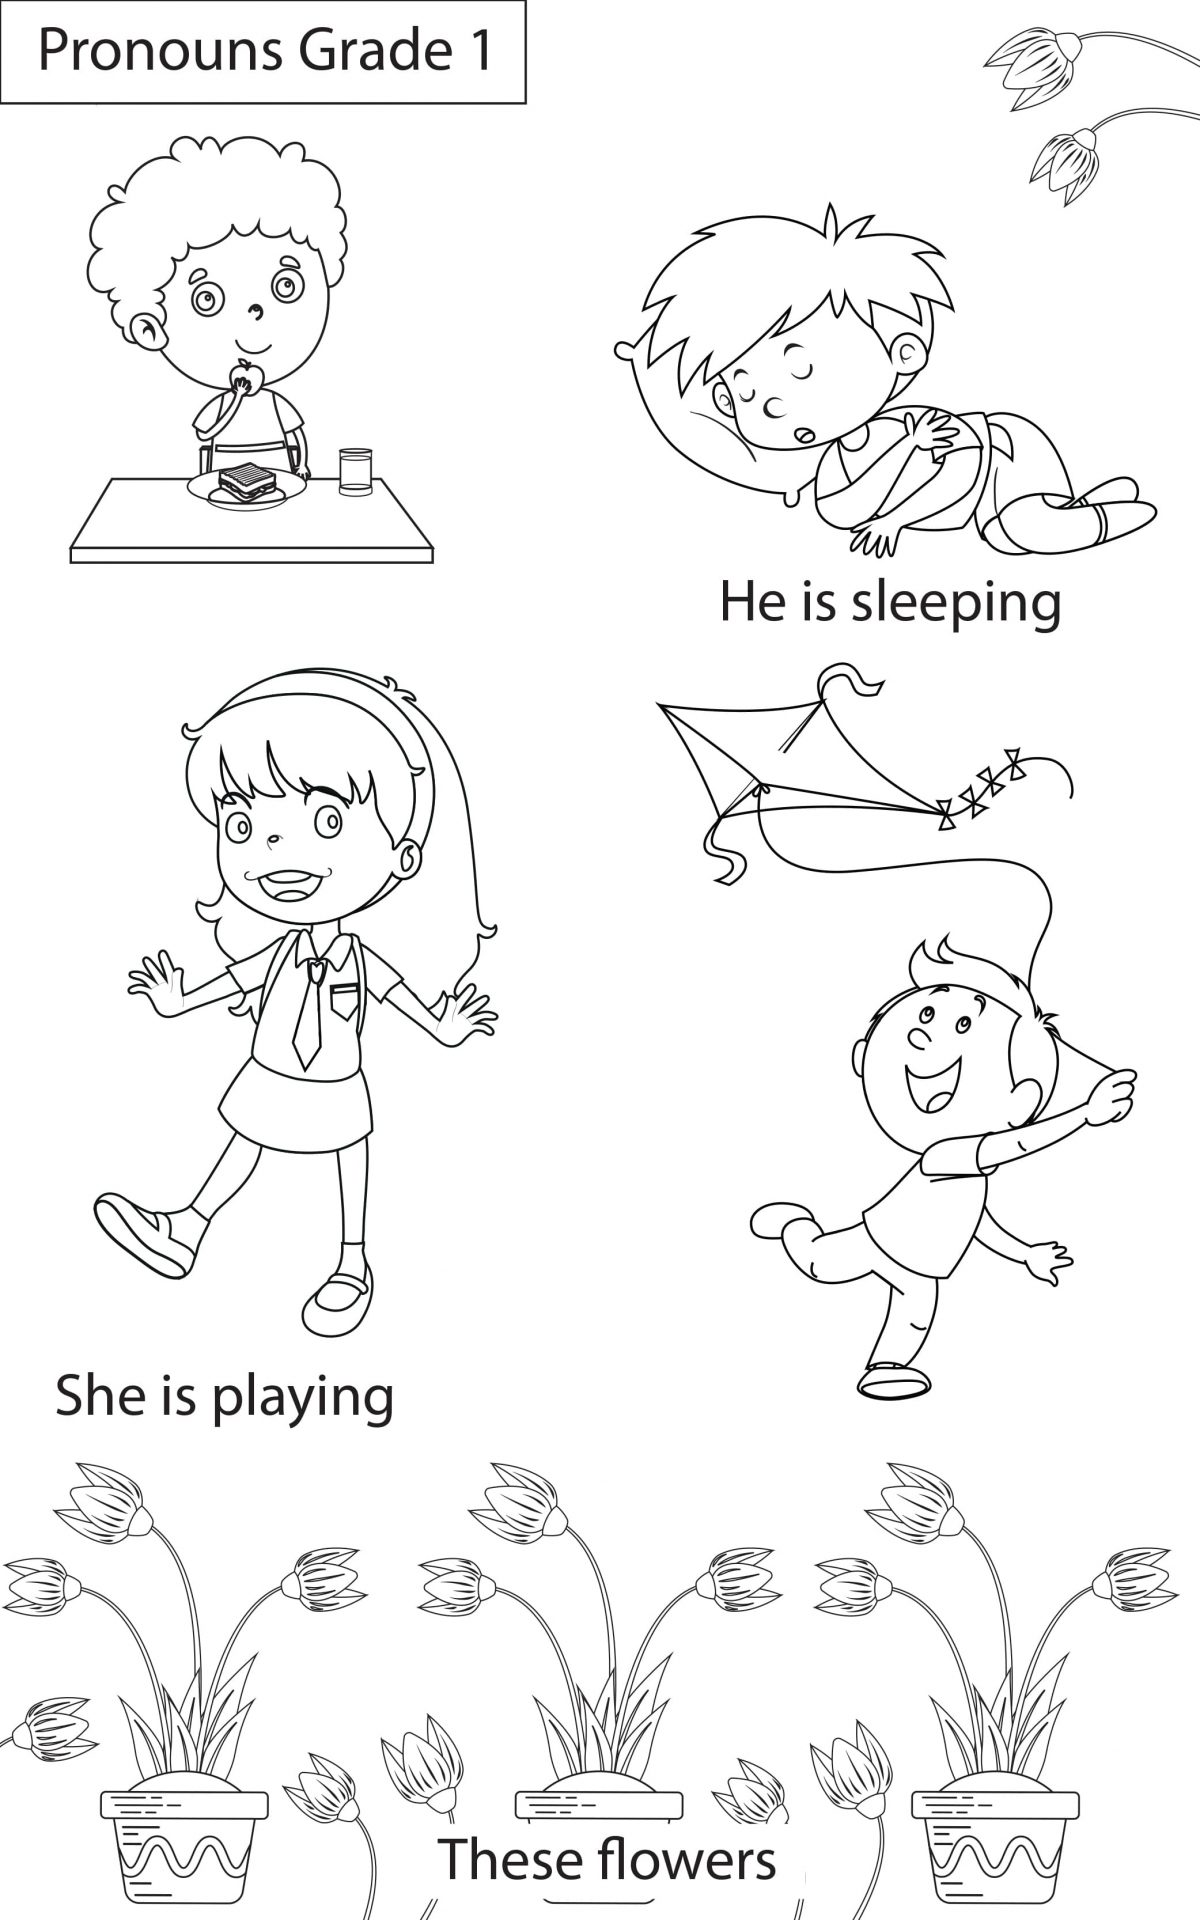 English Story Worksheets For Grade 1